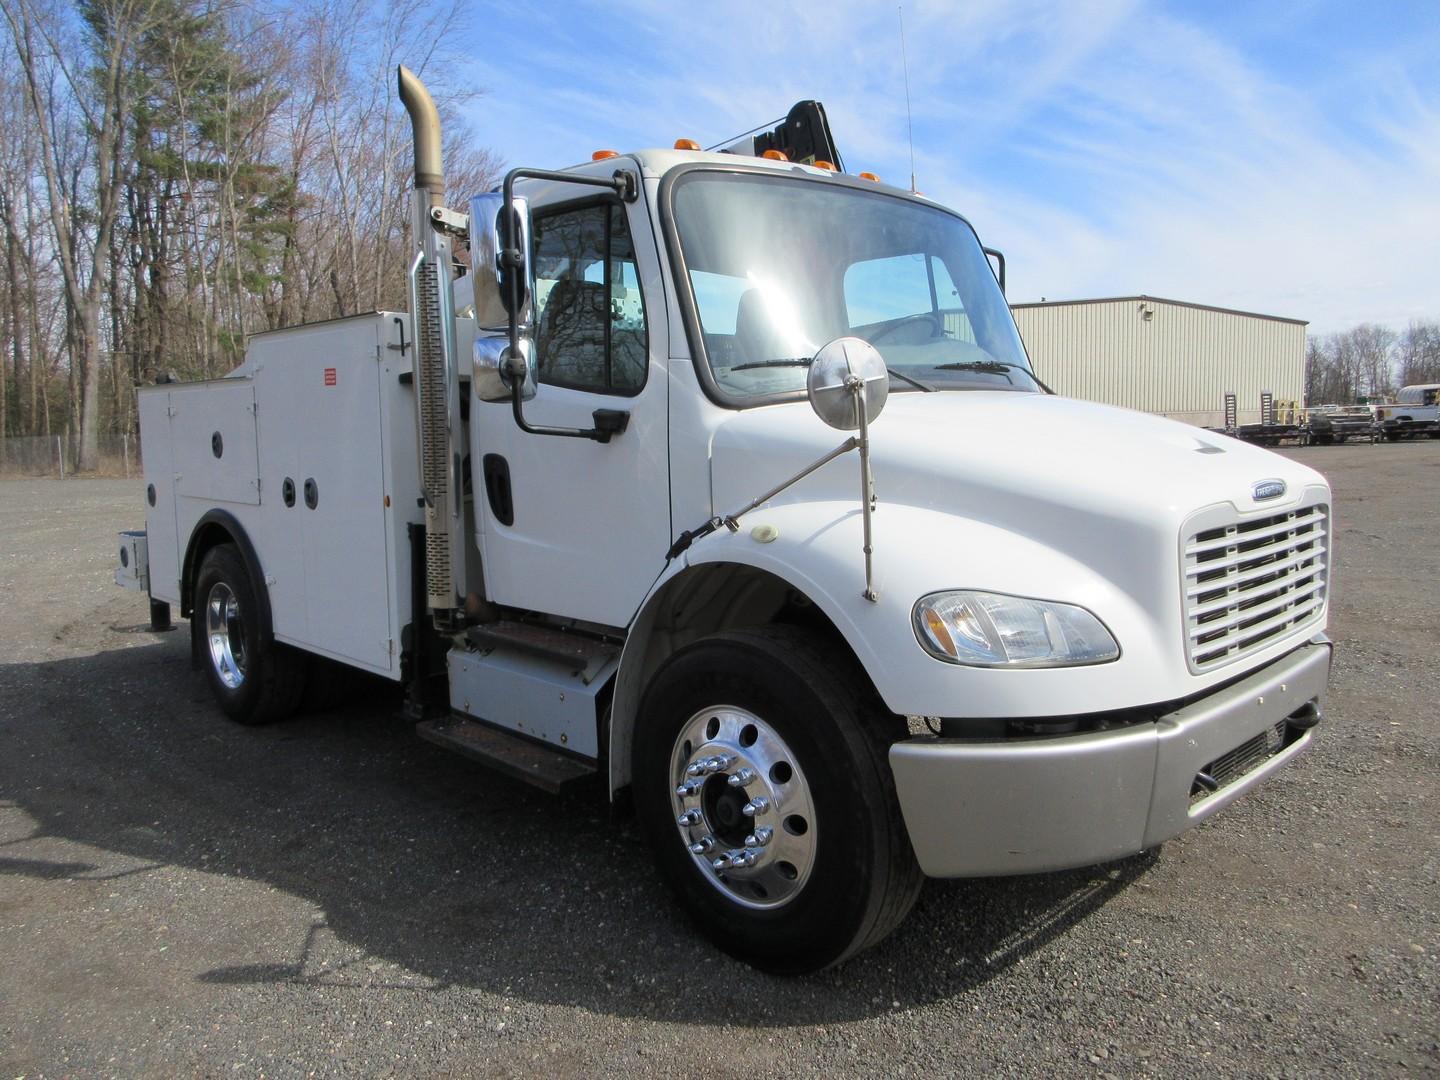 2013 Freightliner M2 S/A Service Truck